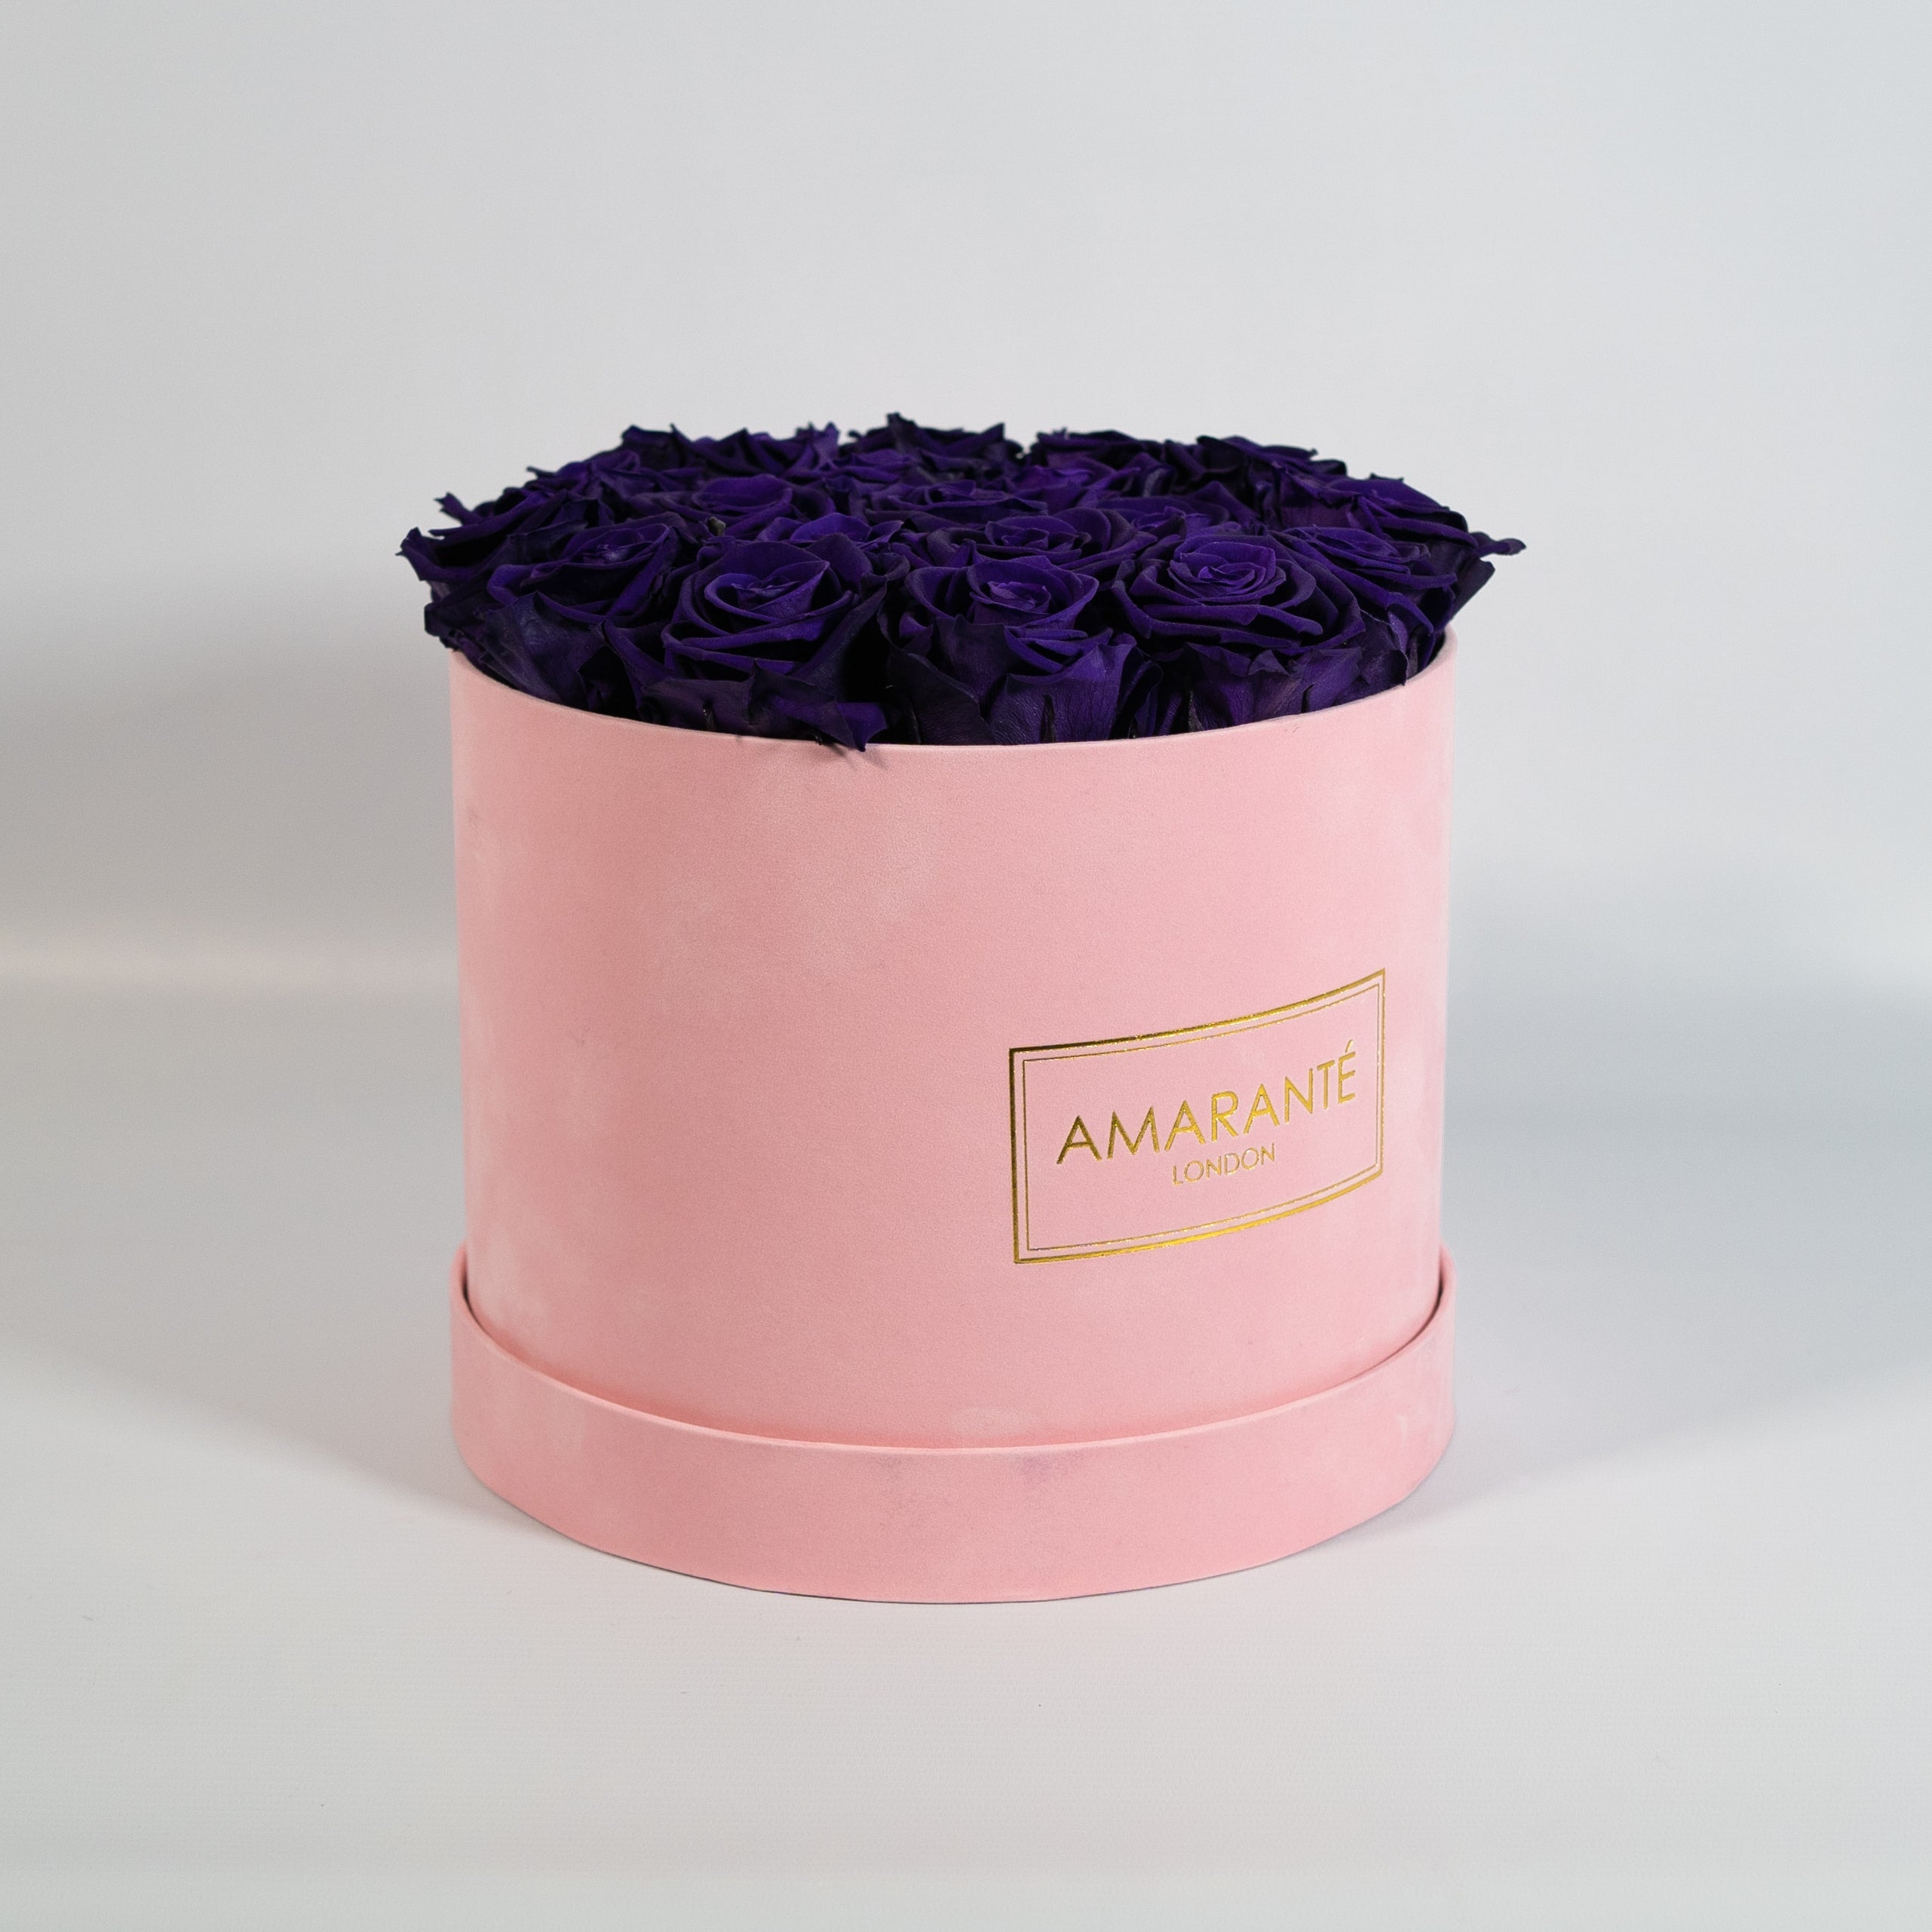 Luxurious dark purple Roses imbedded in a magical pink box 